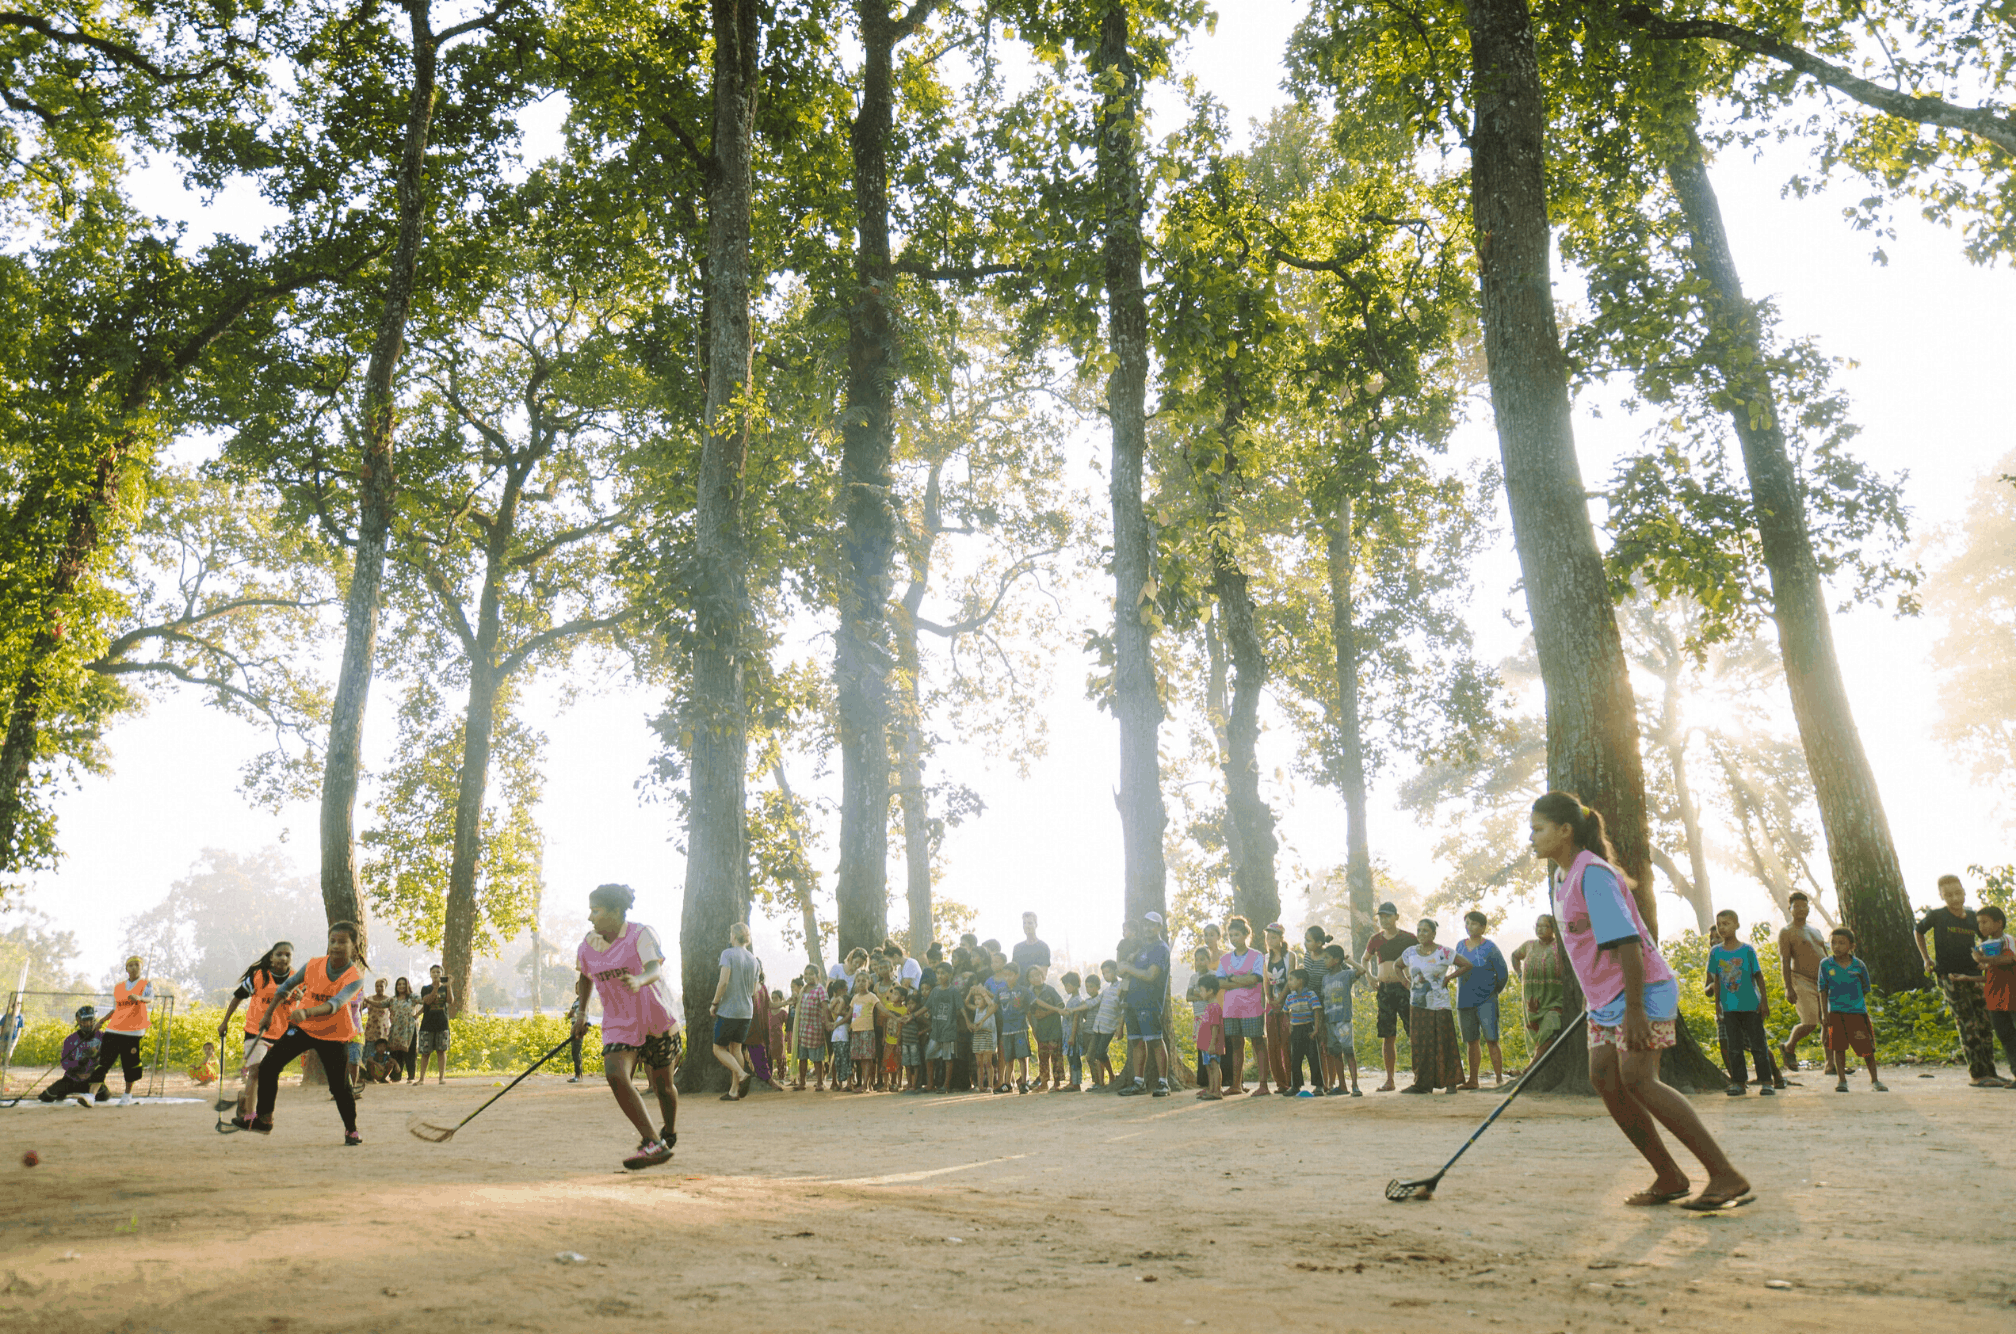 Children of the Himalayan Life Chitwan outreach hockey program play on a dirt field in the jungle of Southern Nepal